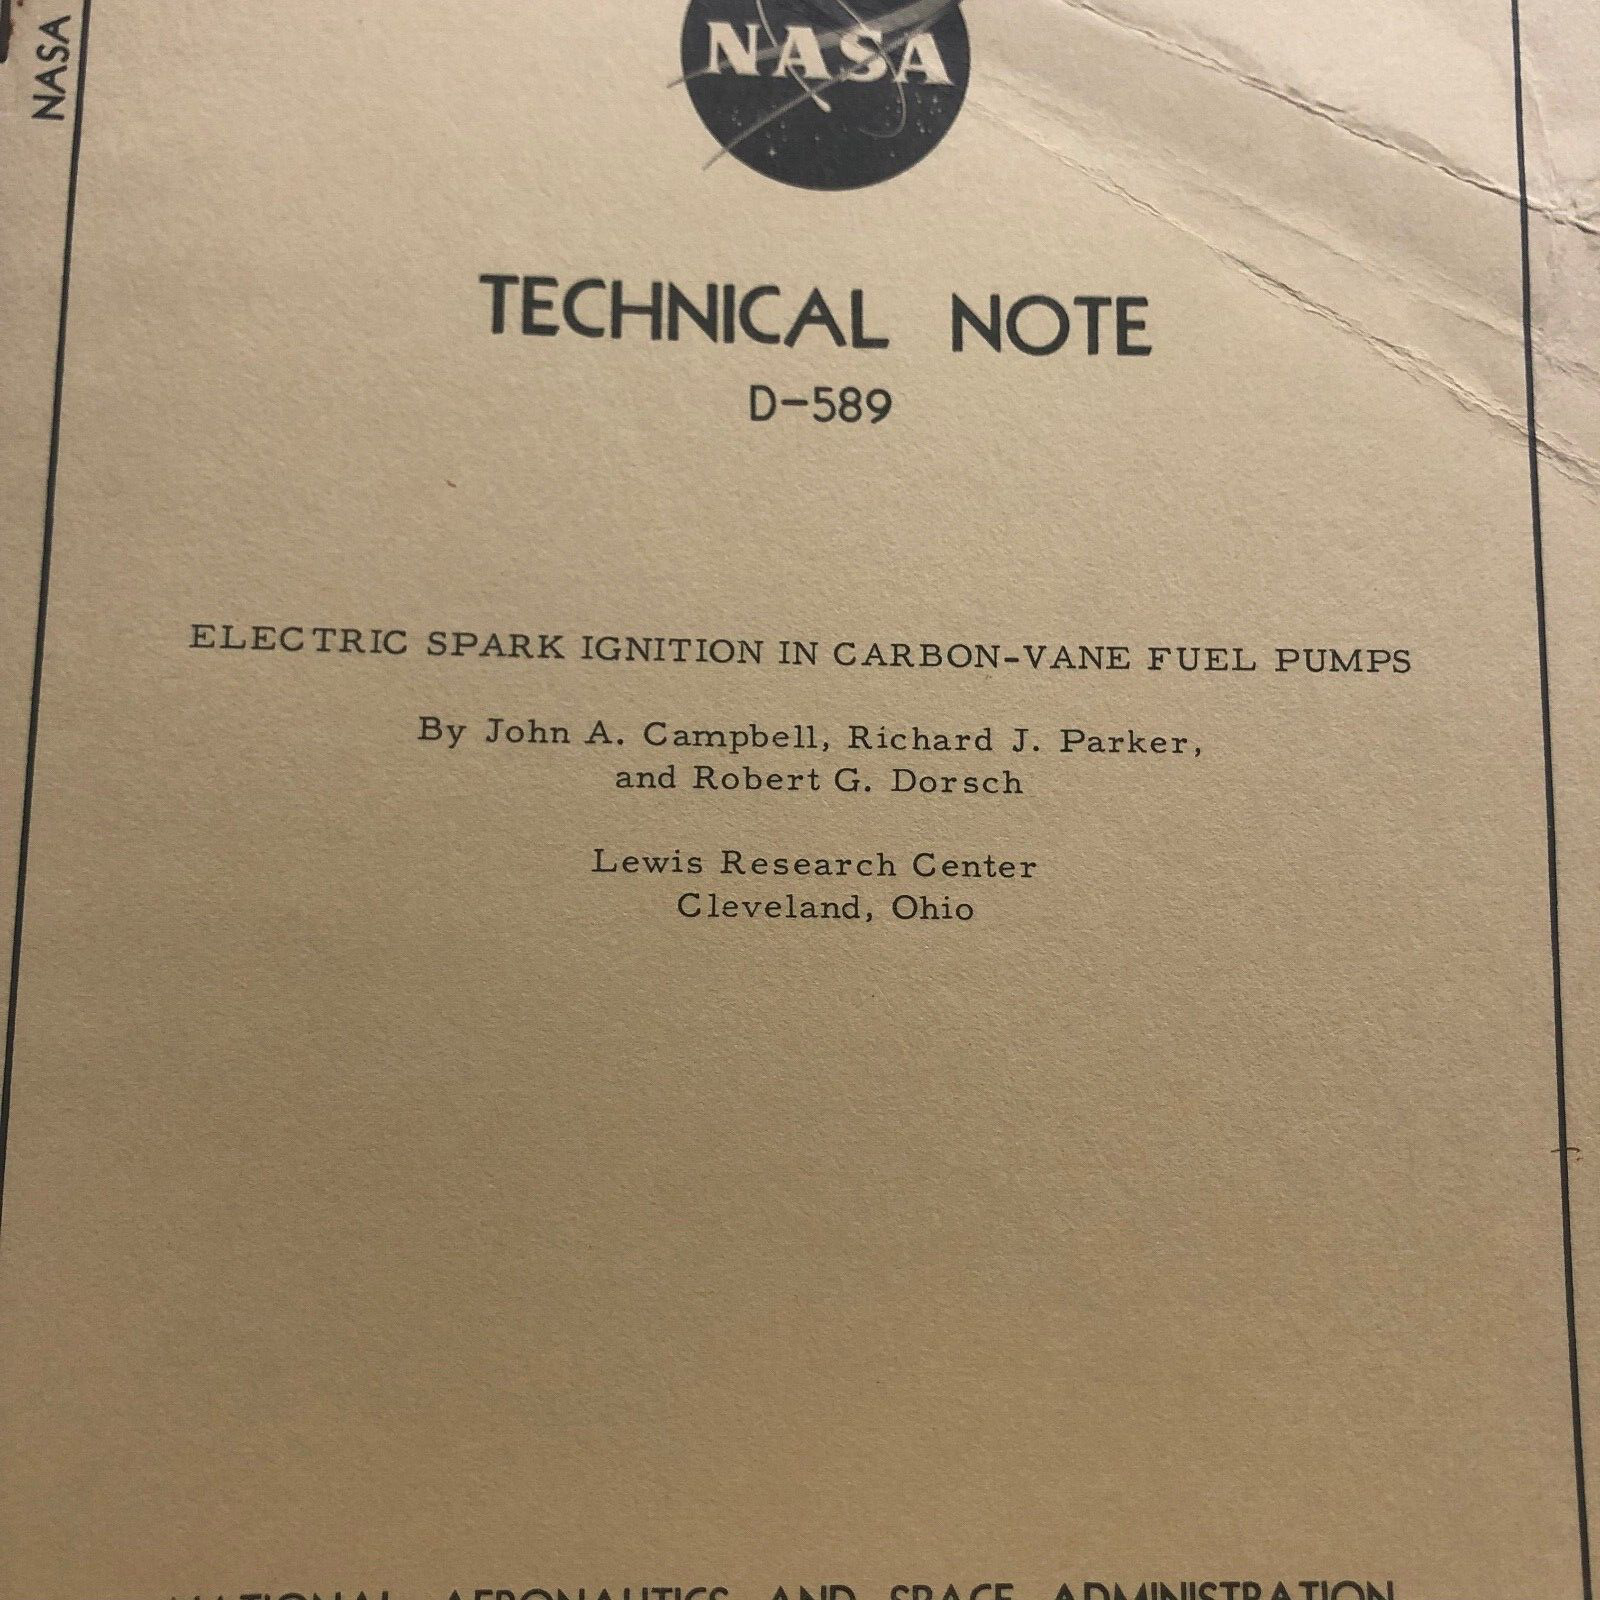 NASA 1960s Technical Note Book, D-589, Electric Spark Ignition in Carbon Vane